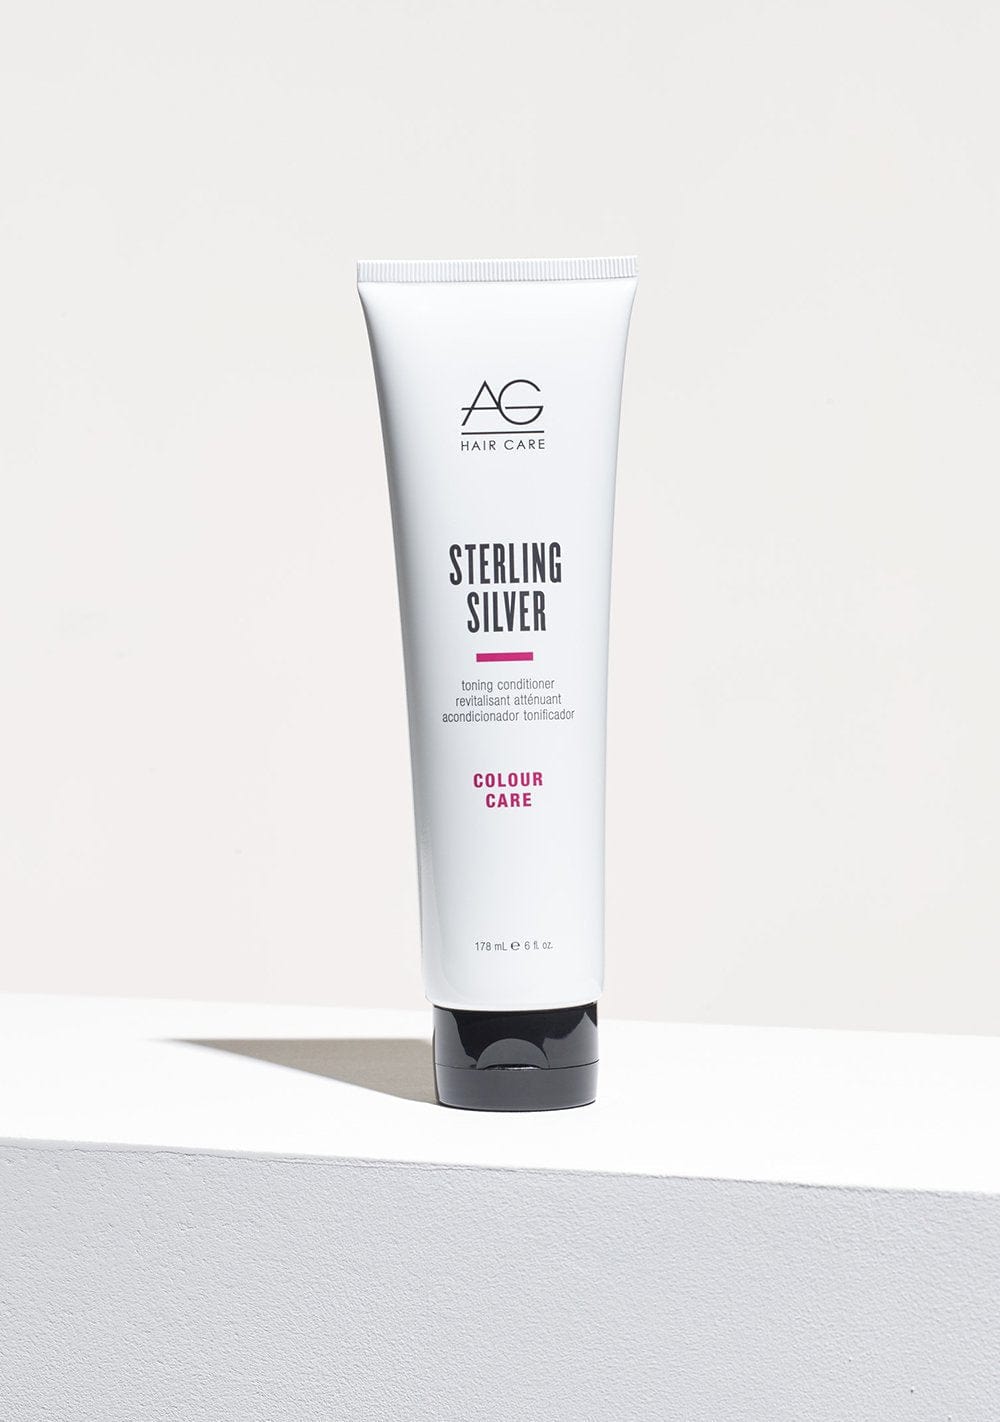 AG_AG Sterling Silver Toning Conditioner_Cosmetic World